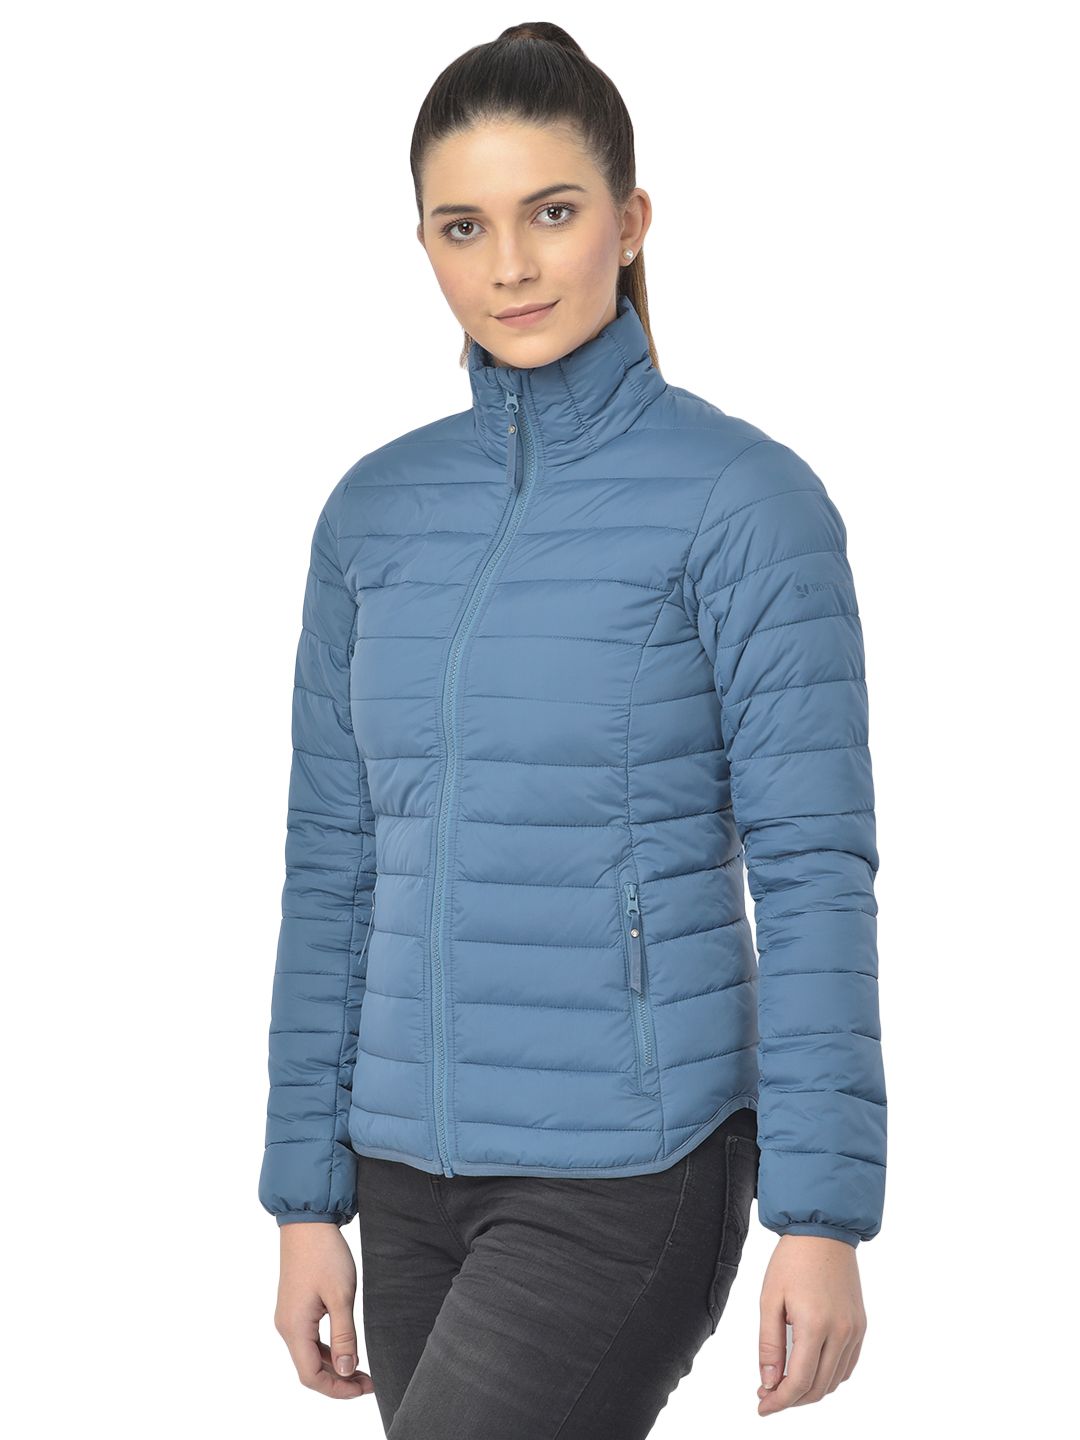 Moonlight blue quilted jacket